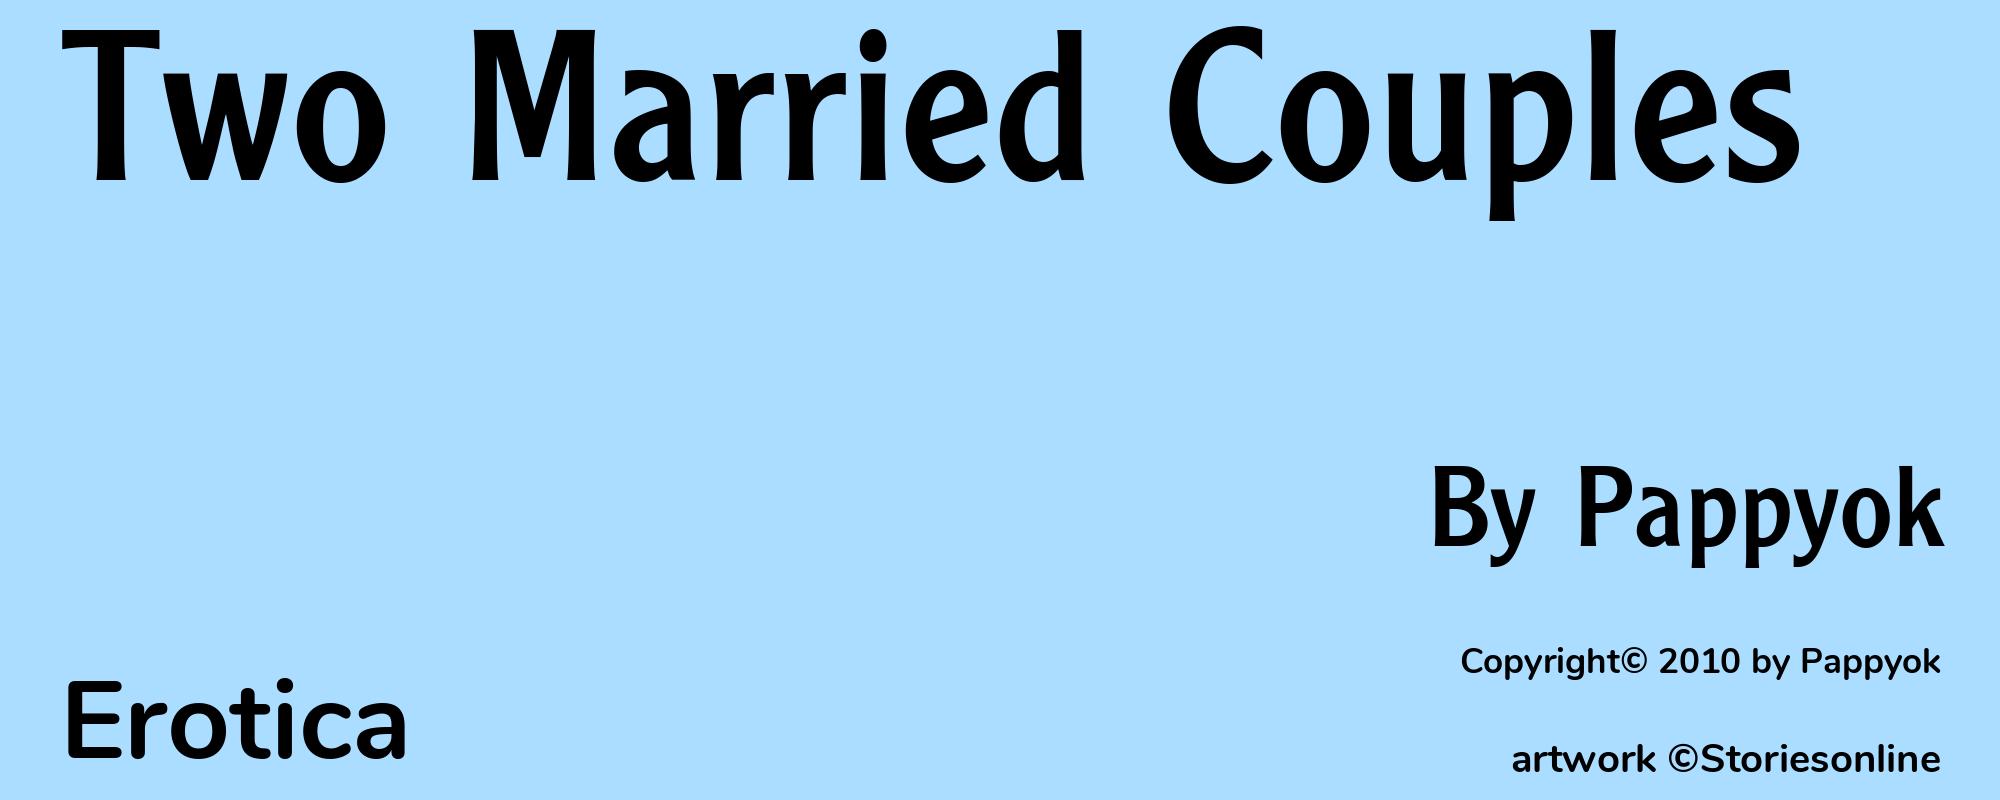 Two Married Couples - Cover